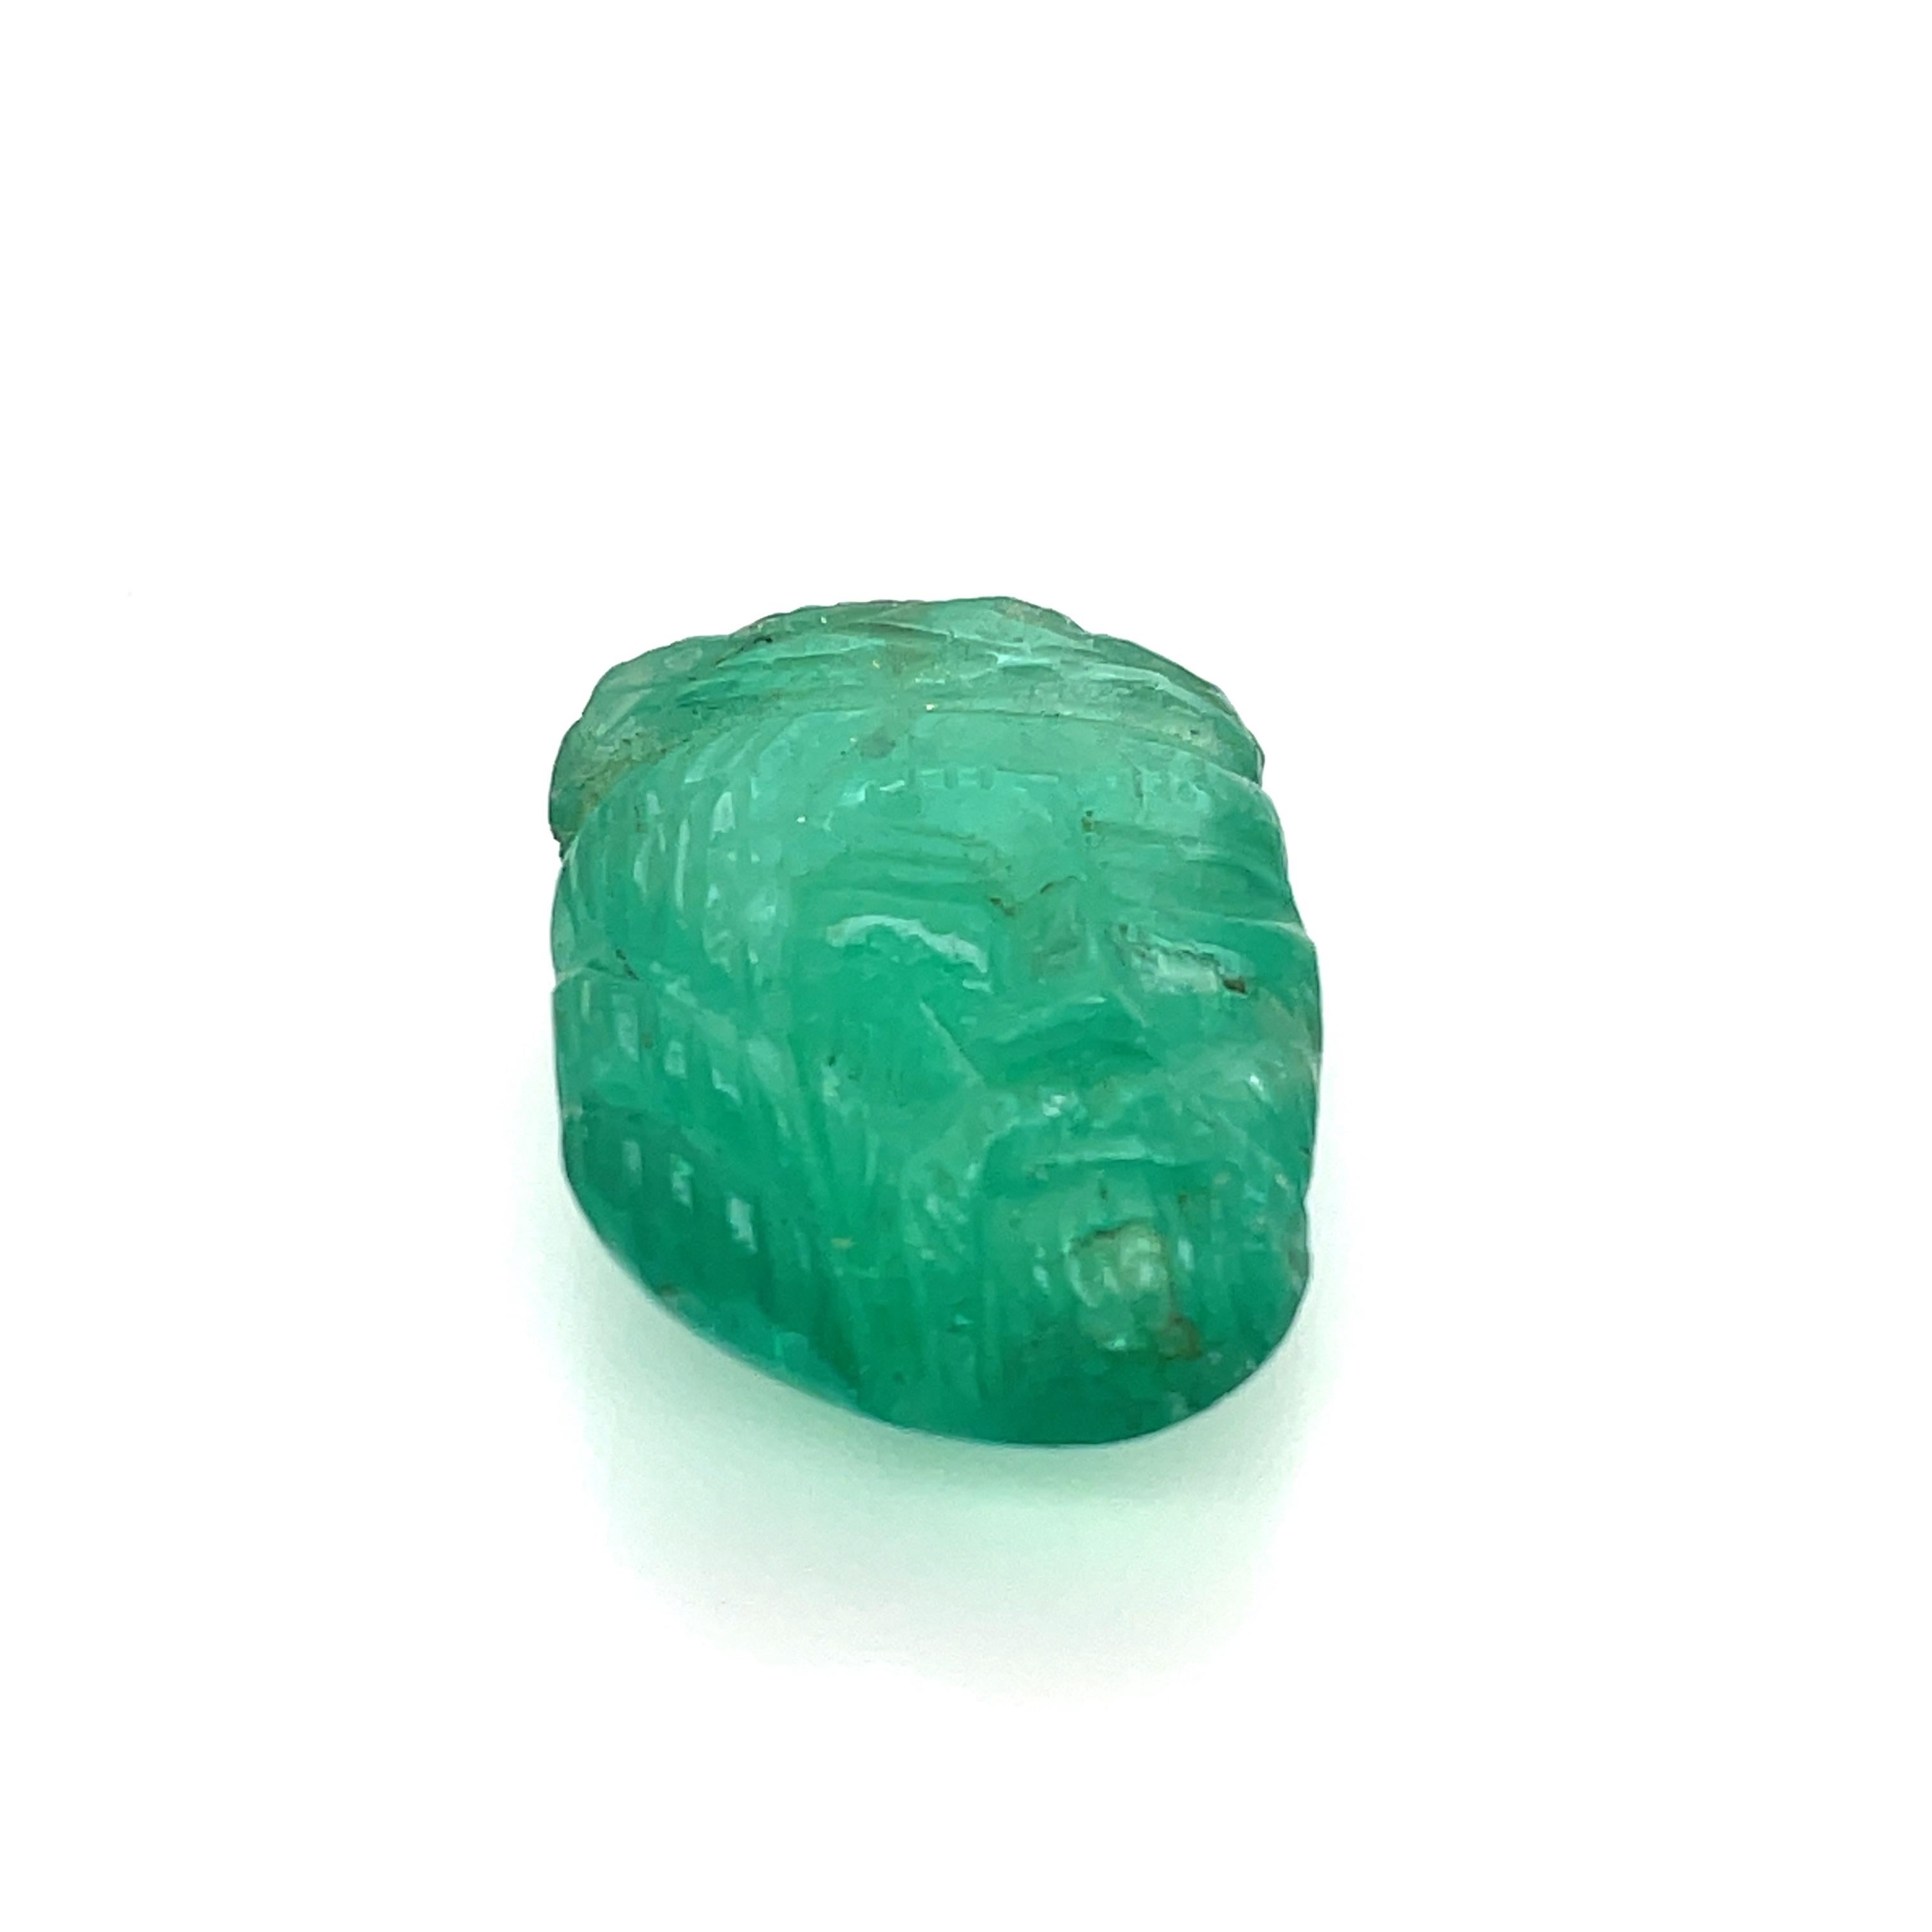 Oval Cut Carved Emerald Jesus Christ Cts 60.84 For Sale